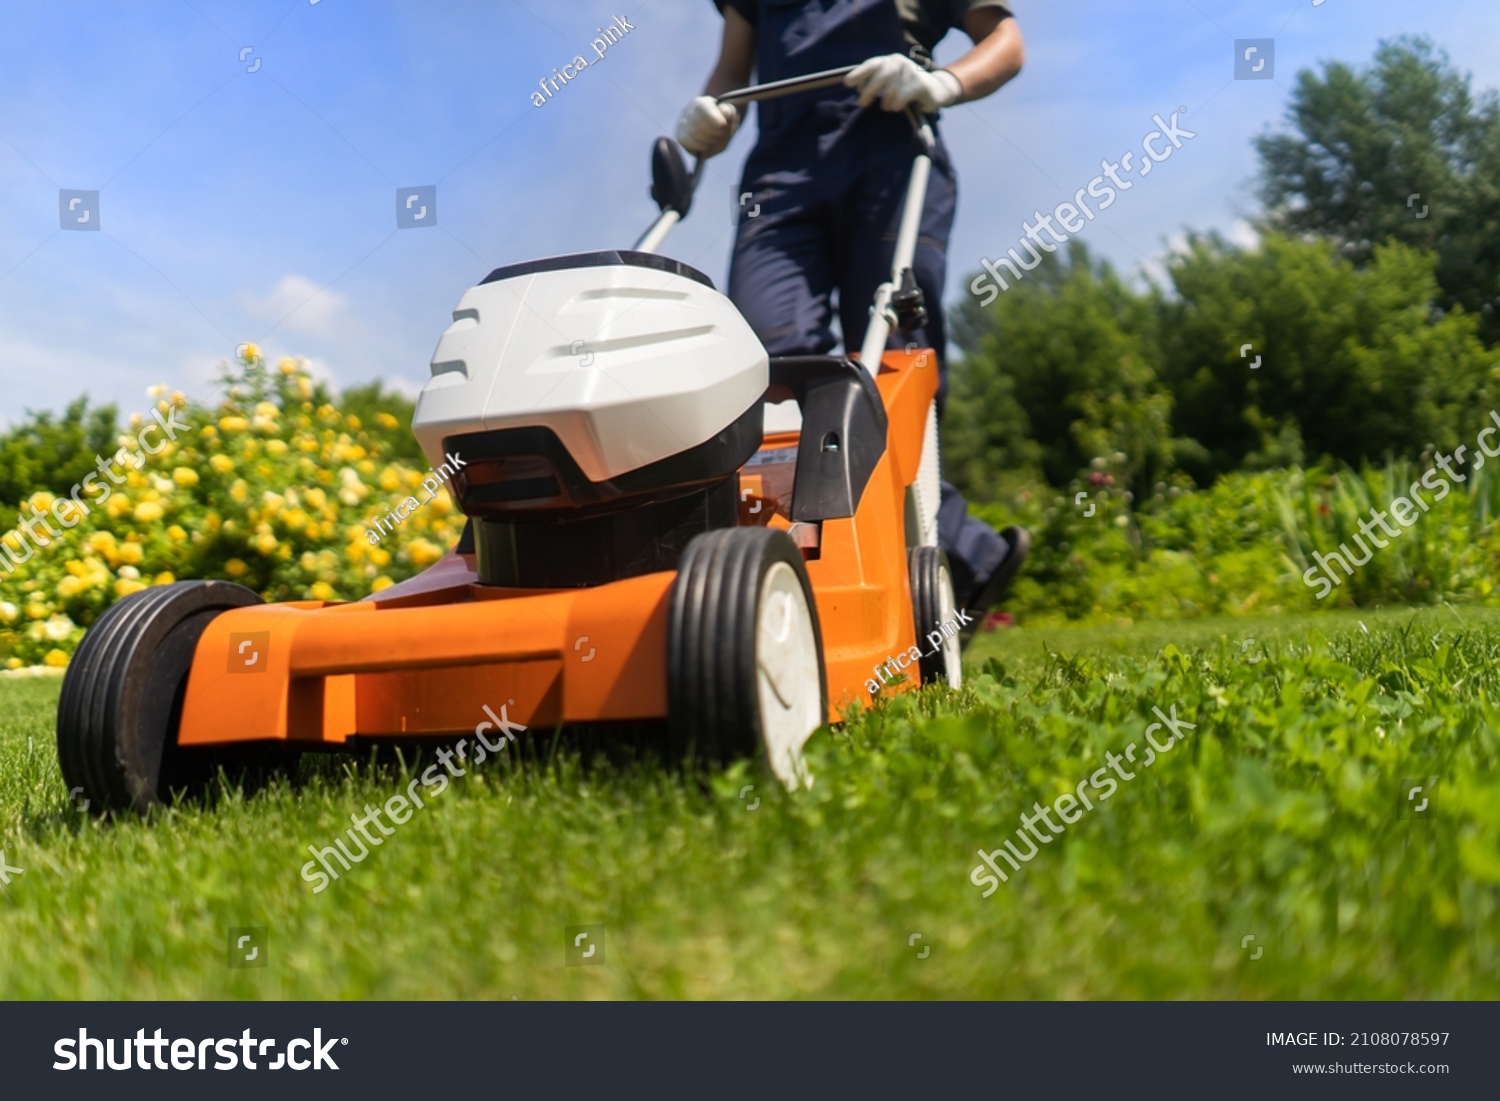 A young man is mowing a lawn with a lawn mower in his beautiful green floral summer garden. A professional gardener with a lawnmower cares for the grass in the backyard. #2108078597